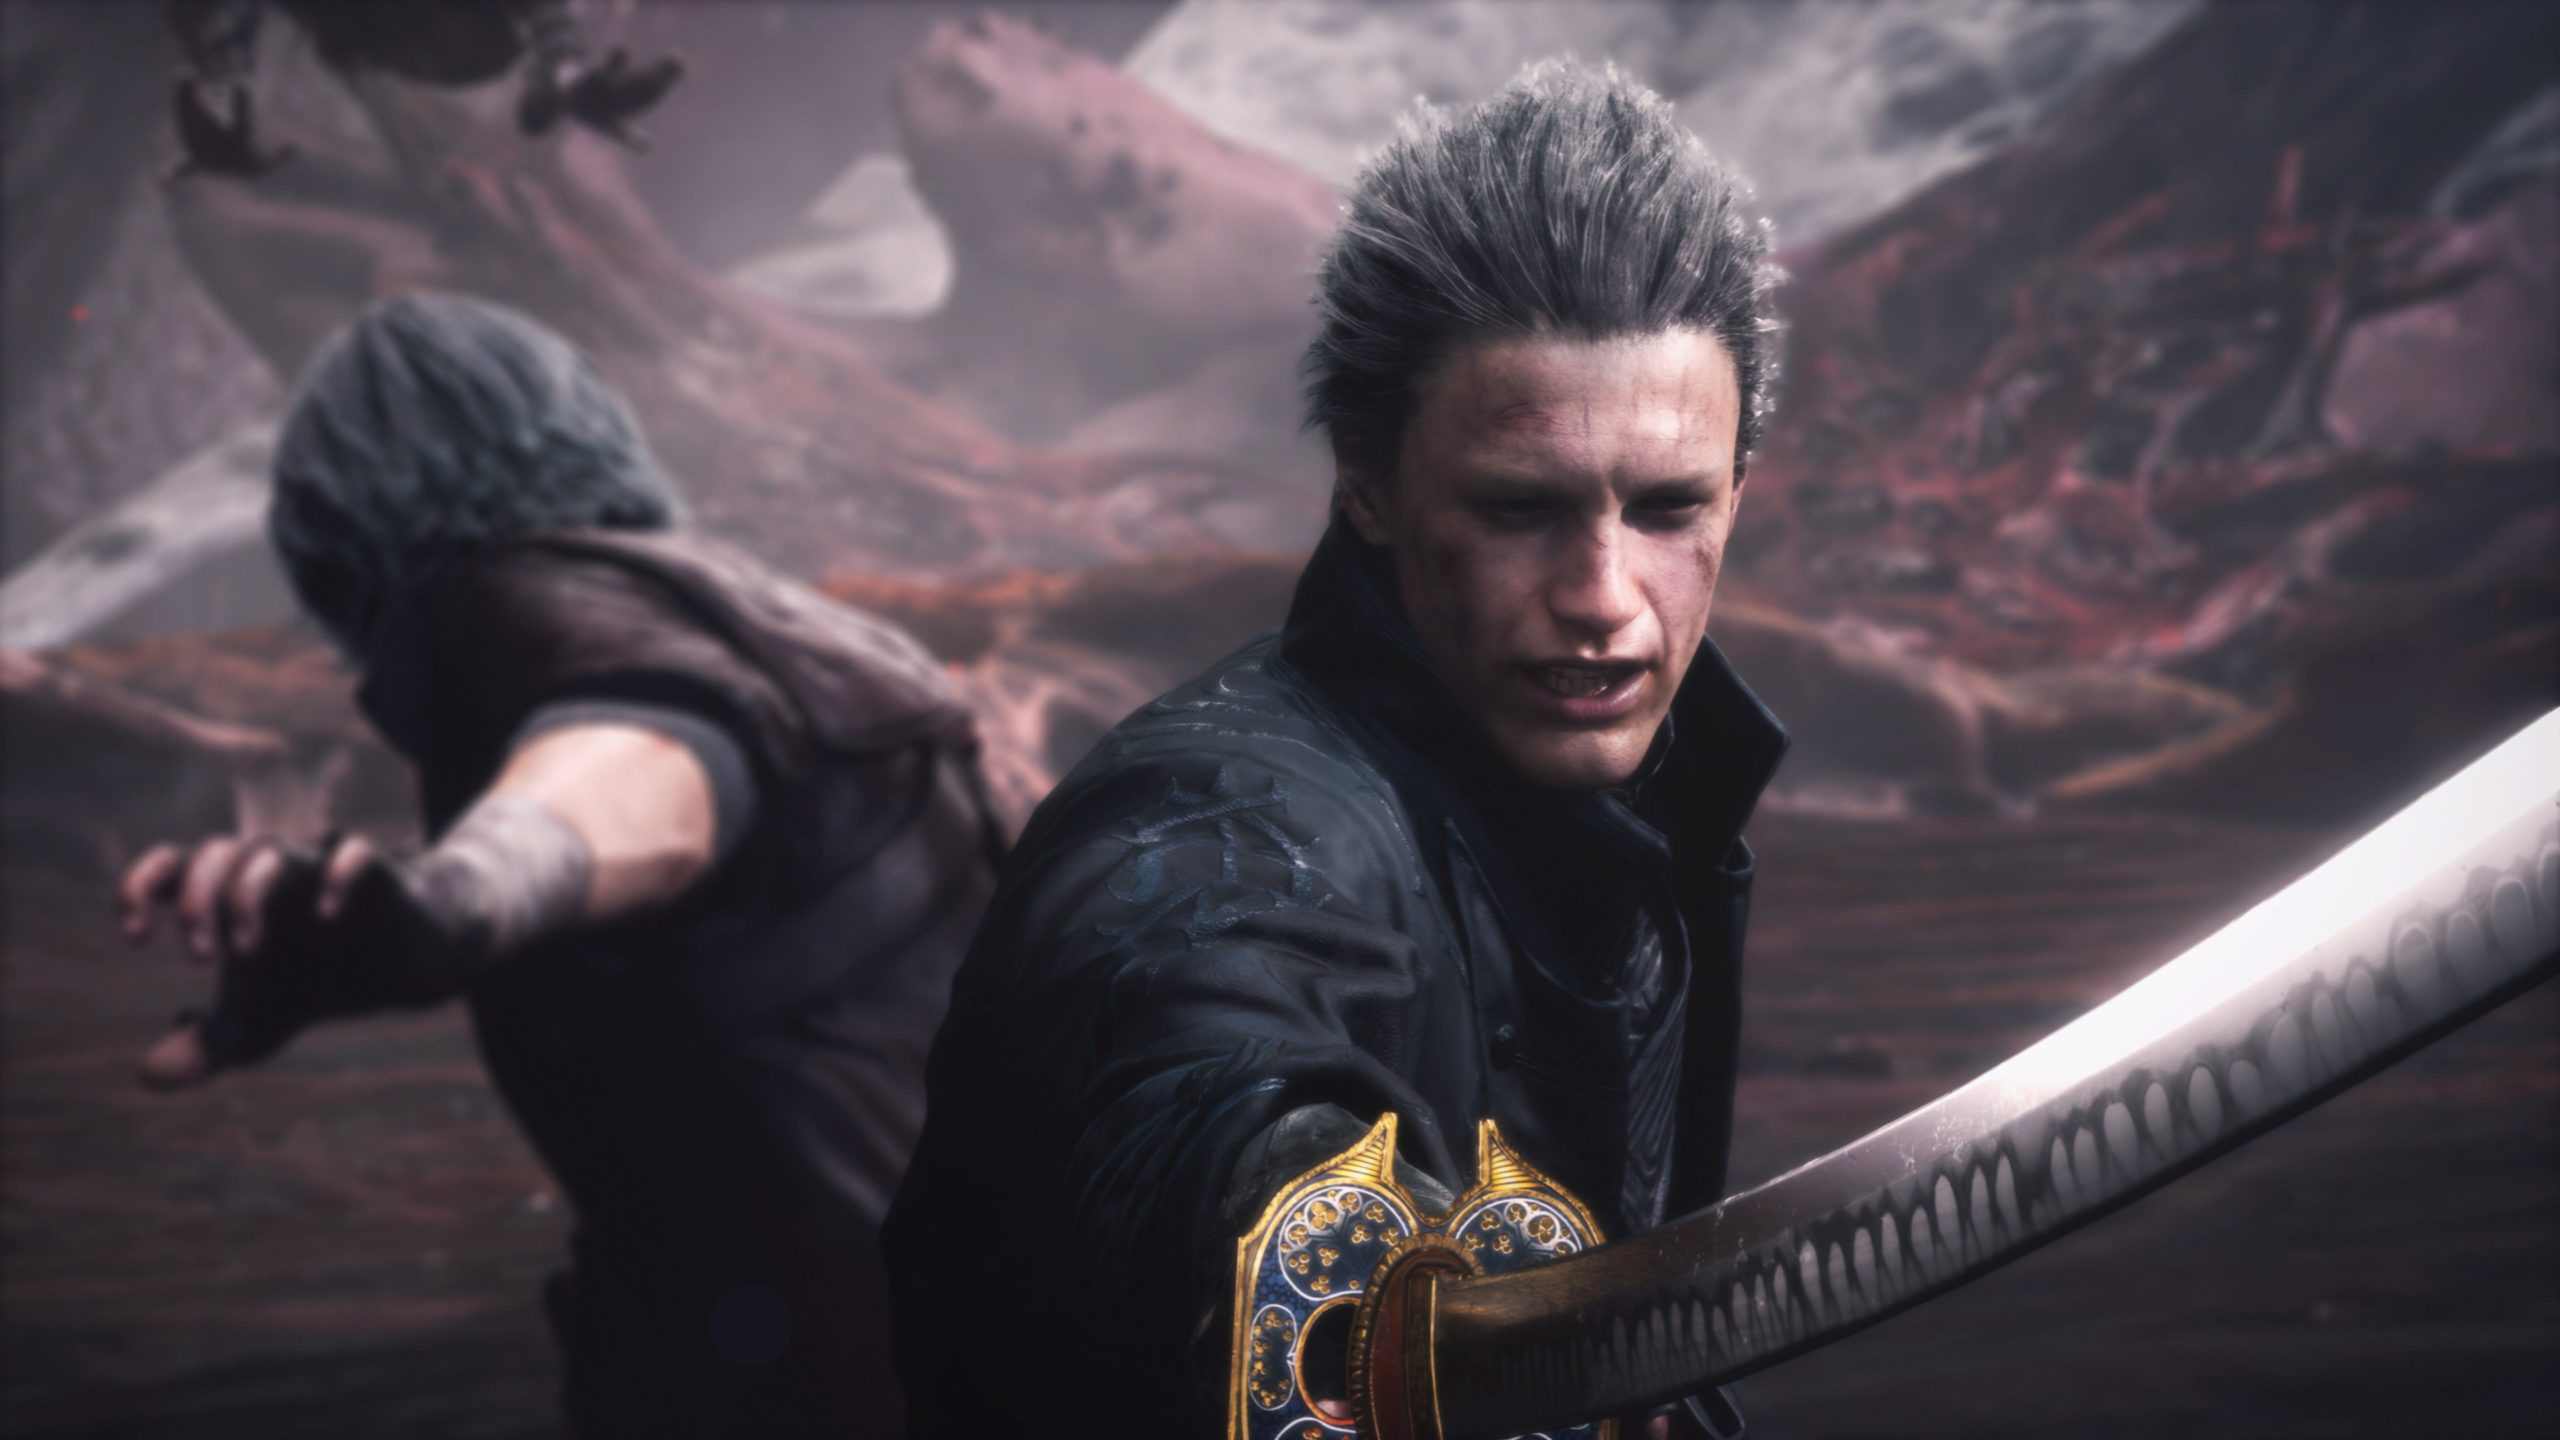 devil may cry 5 trophy guide